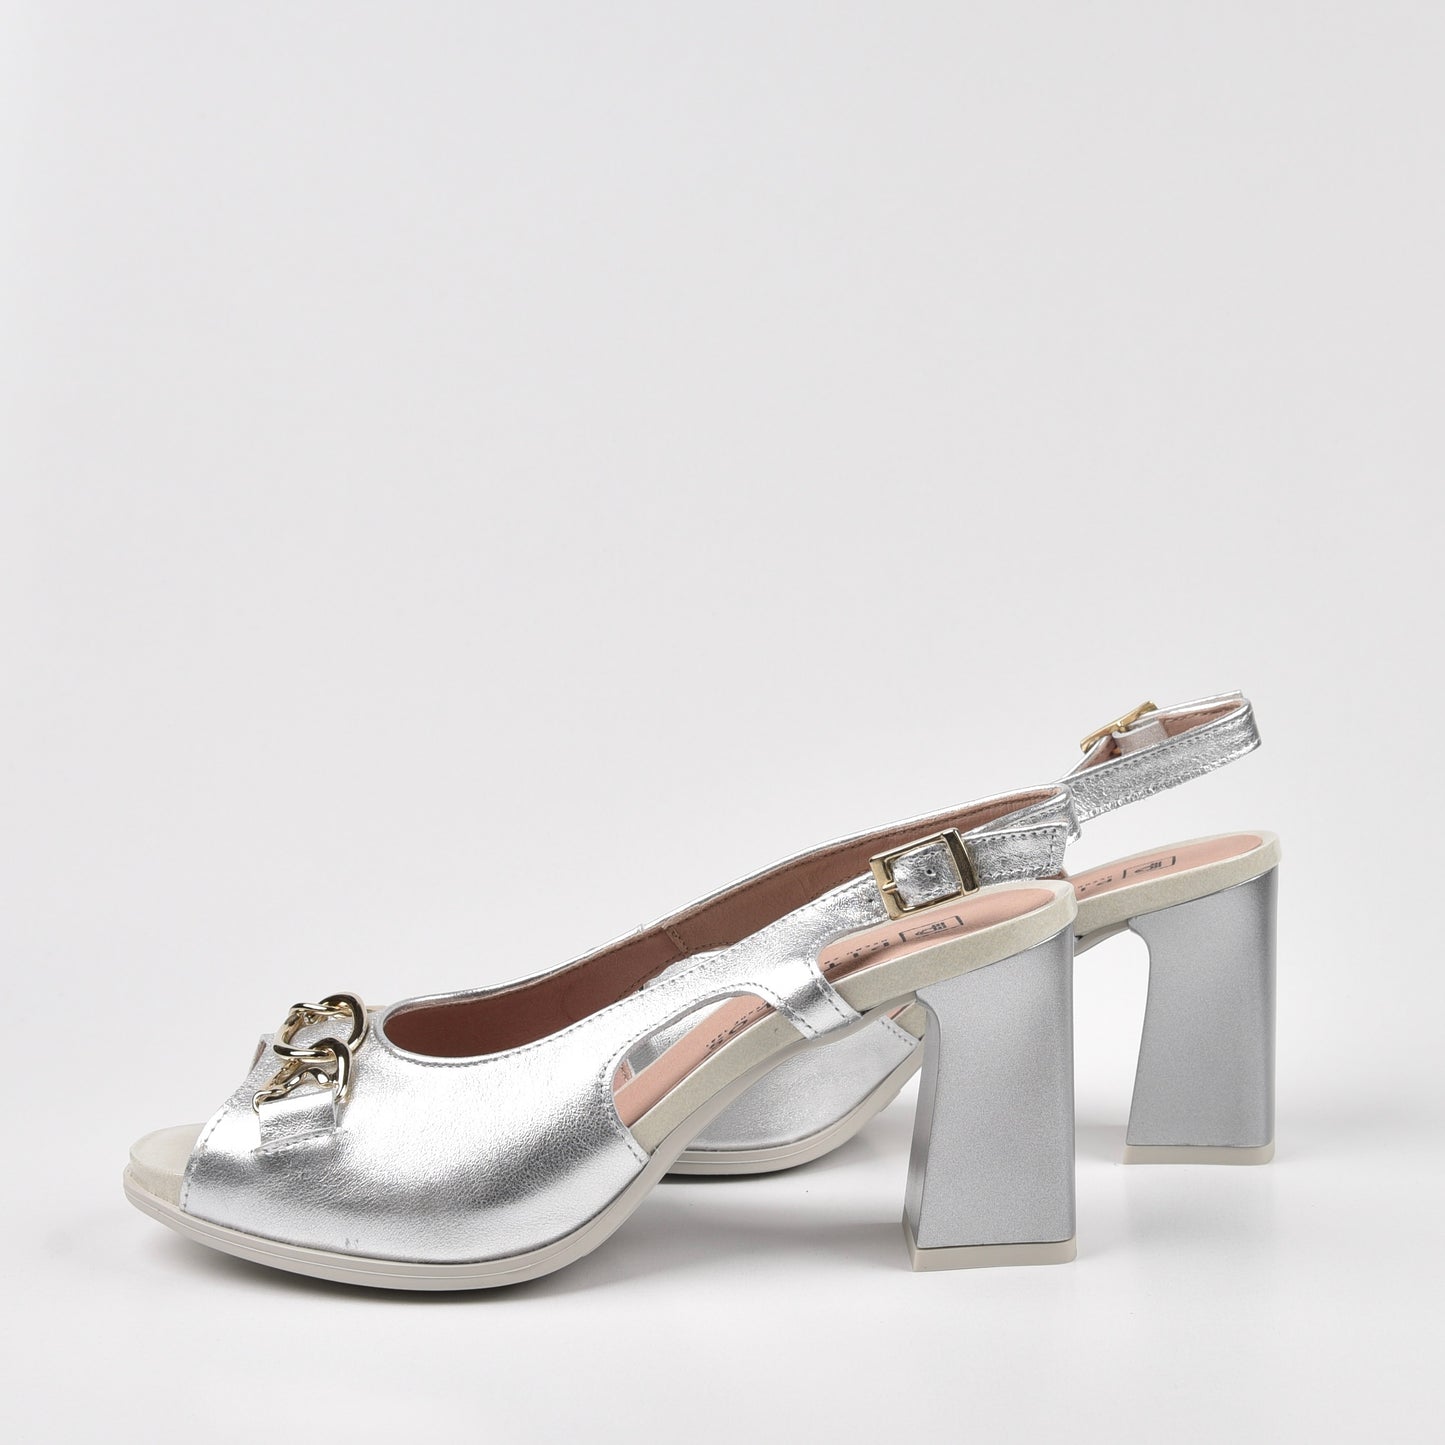 Pitillos Spanish Classic High-Heel Sandal for Women in Silver .